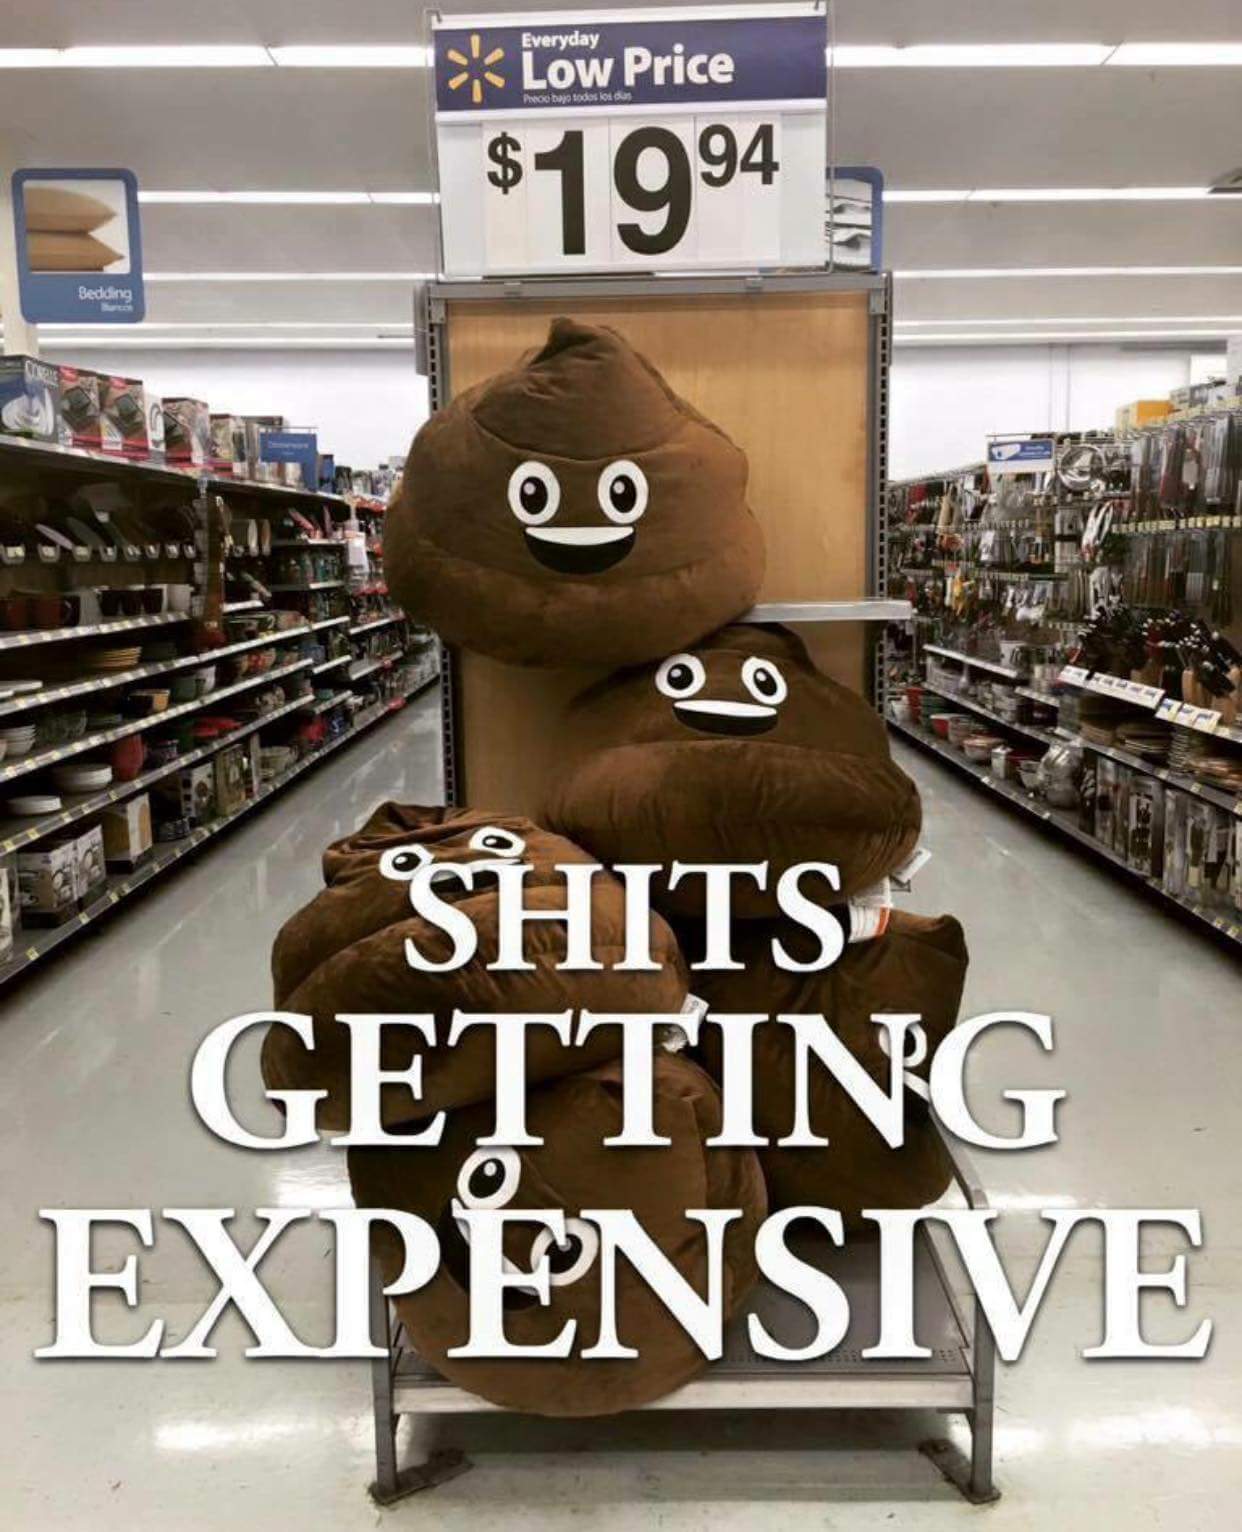 Shit's getting expensive.